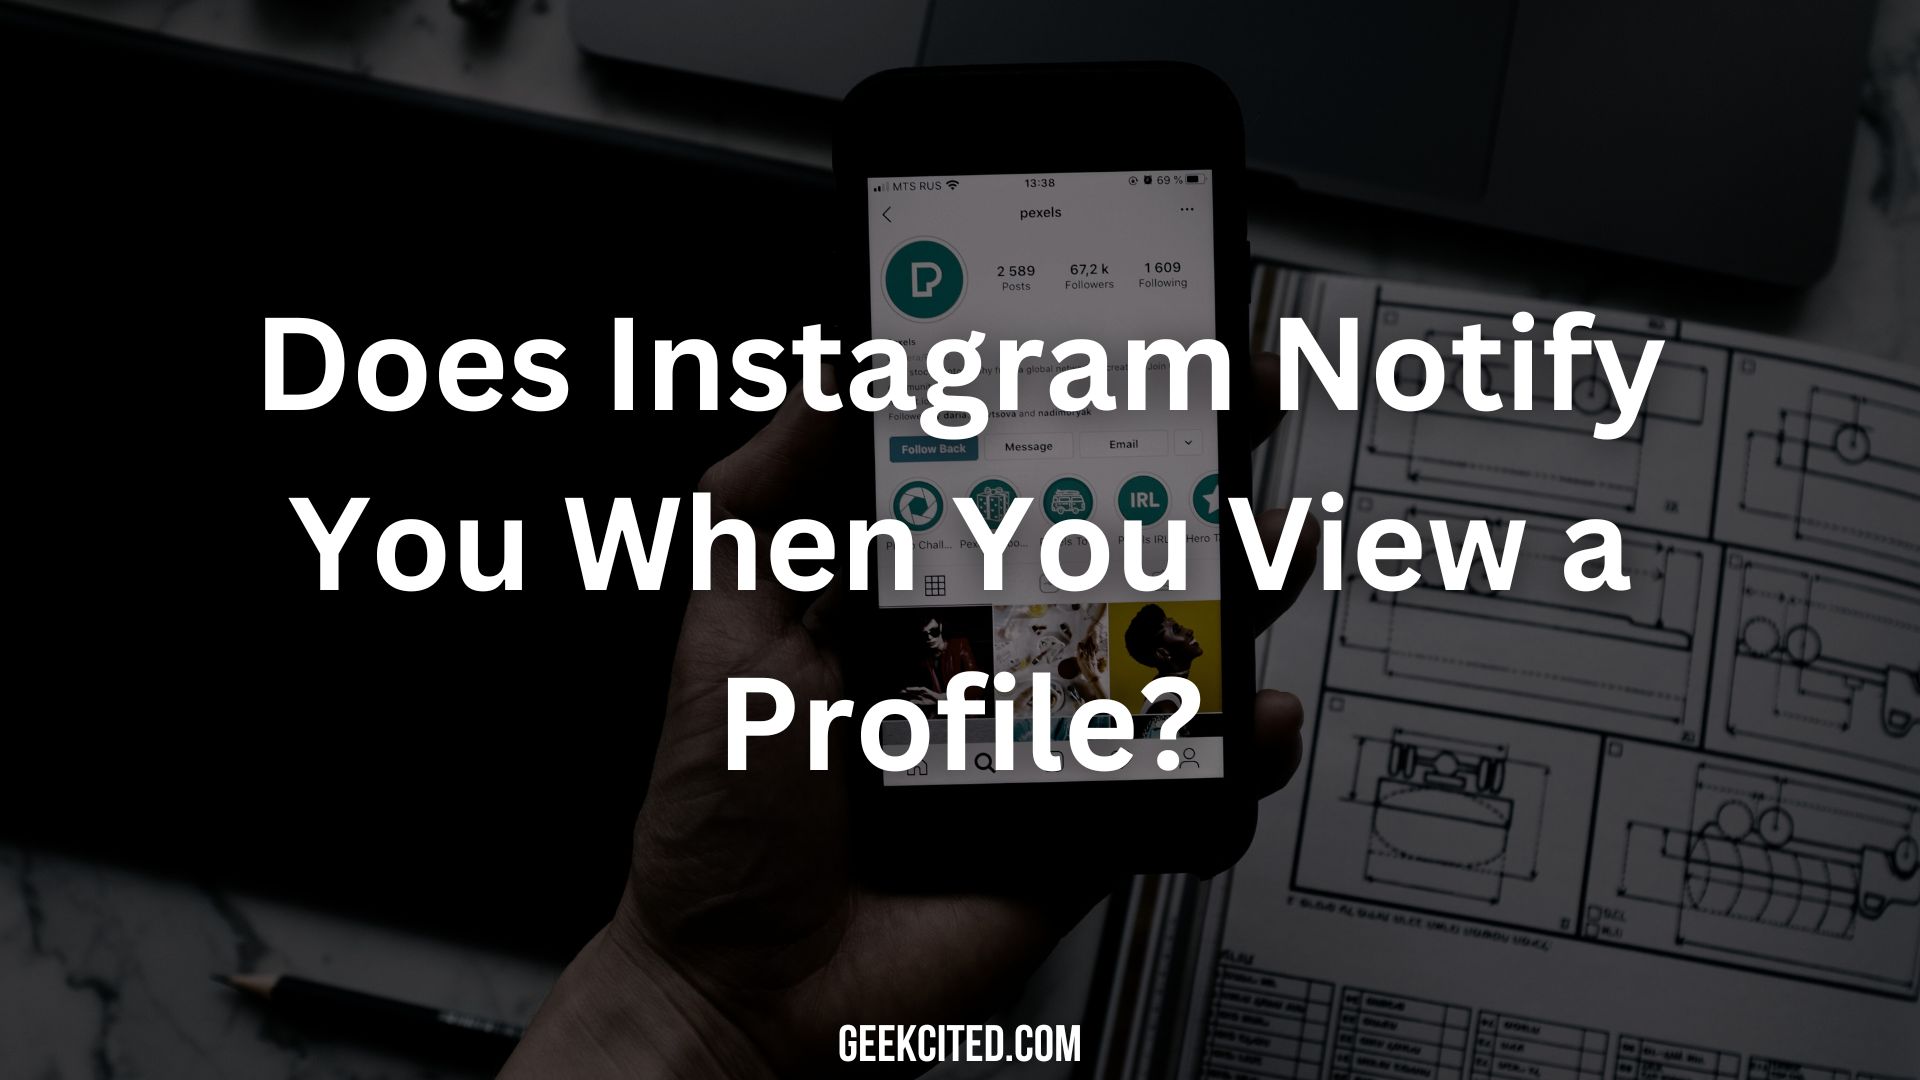 Does Instagram Notify You When You View a Profile